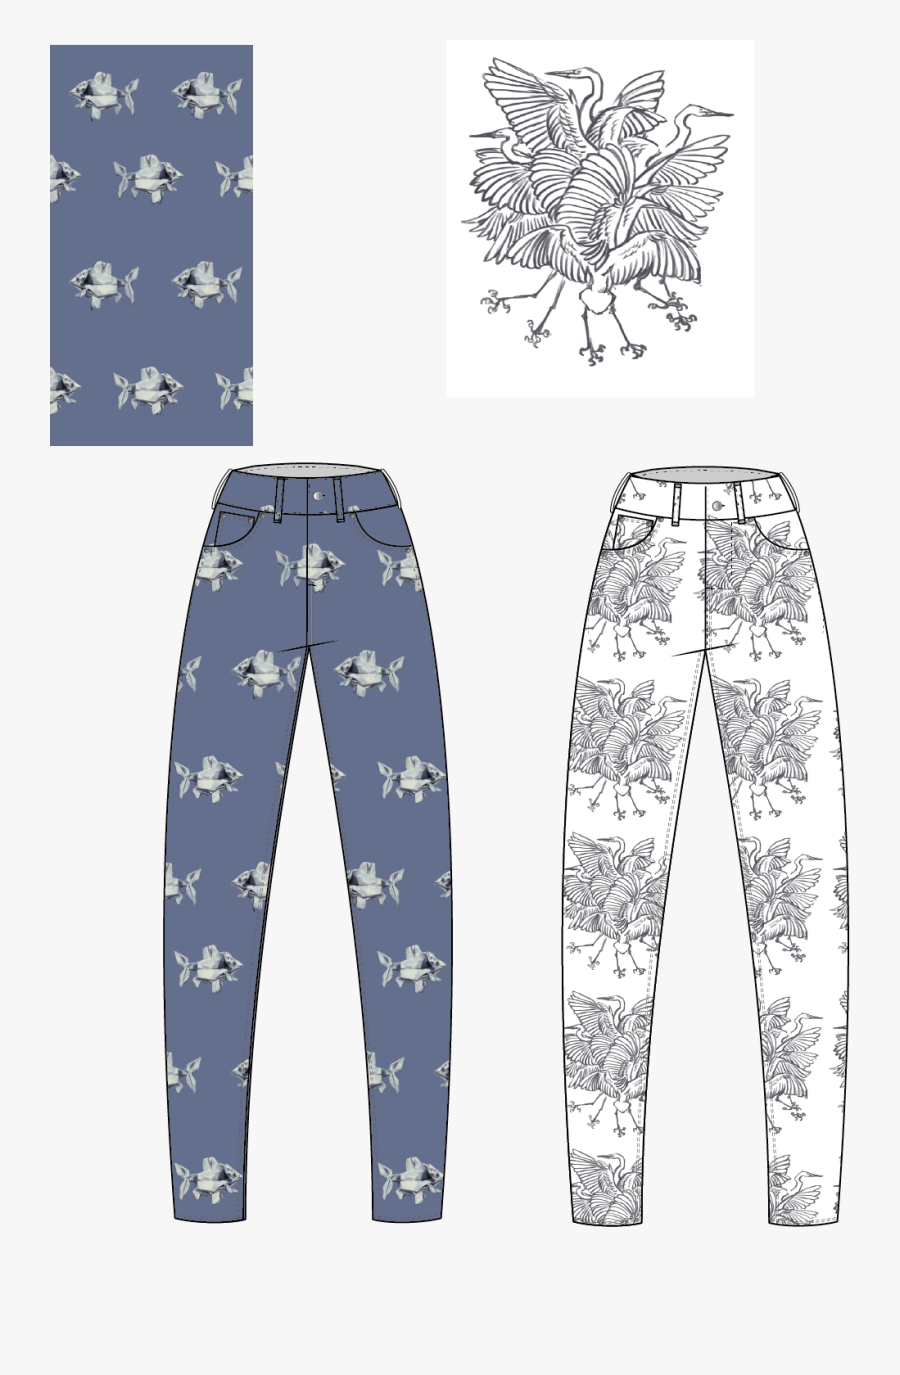 Drawn Jeans Cool Painted - Pajamas, Transparent Clipart